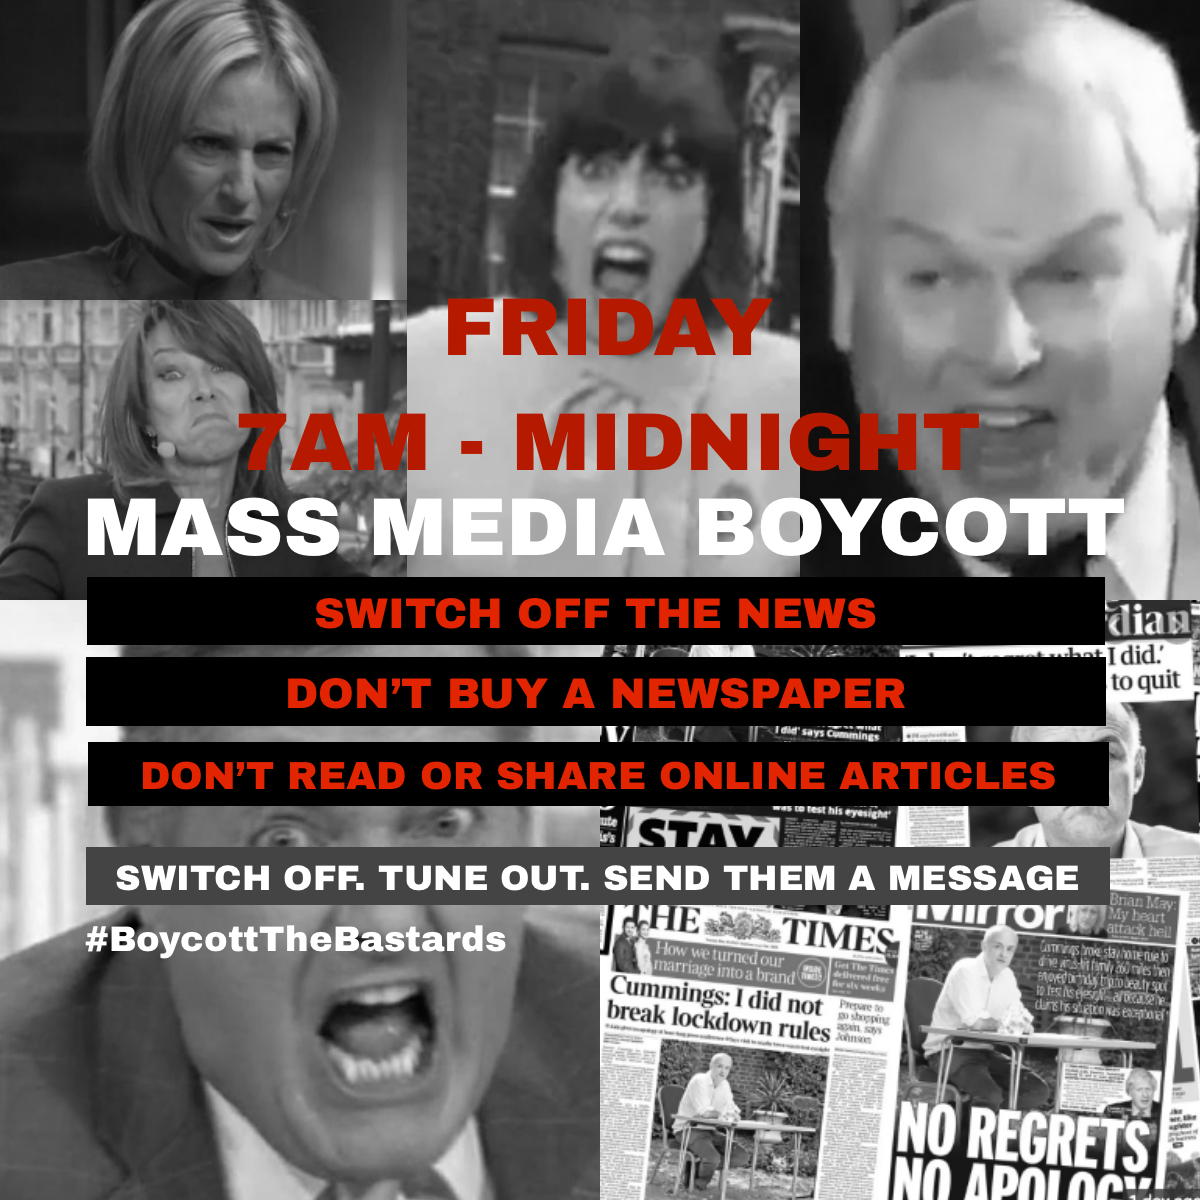 THIS FRIDAY: 7am - Midnight. The first weekly mass media boycott. Don't just moan on Twitter about vile media bias, do something about it: JOIN US Send them a message Hit them where it hurts and #BoycottTheBastards